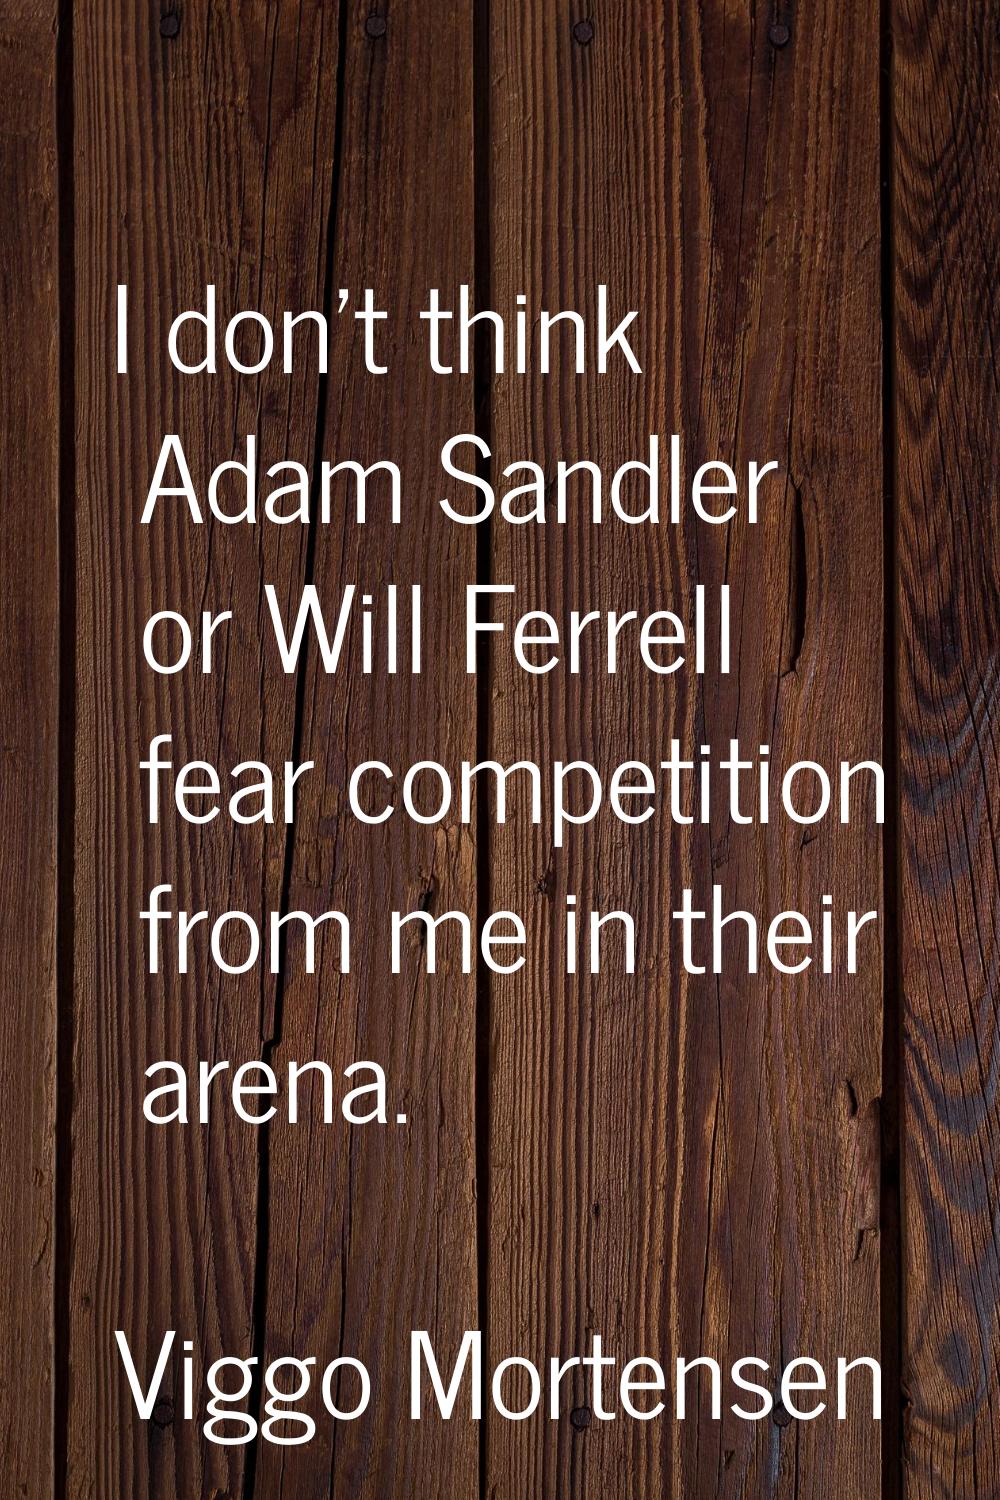 I don't think Adam Sandler or Will Ferrell fear competition from me in their arena.